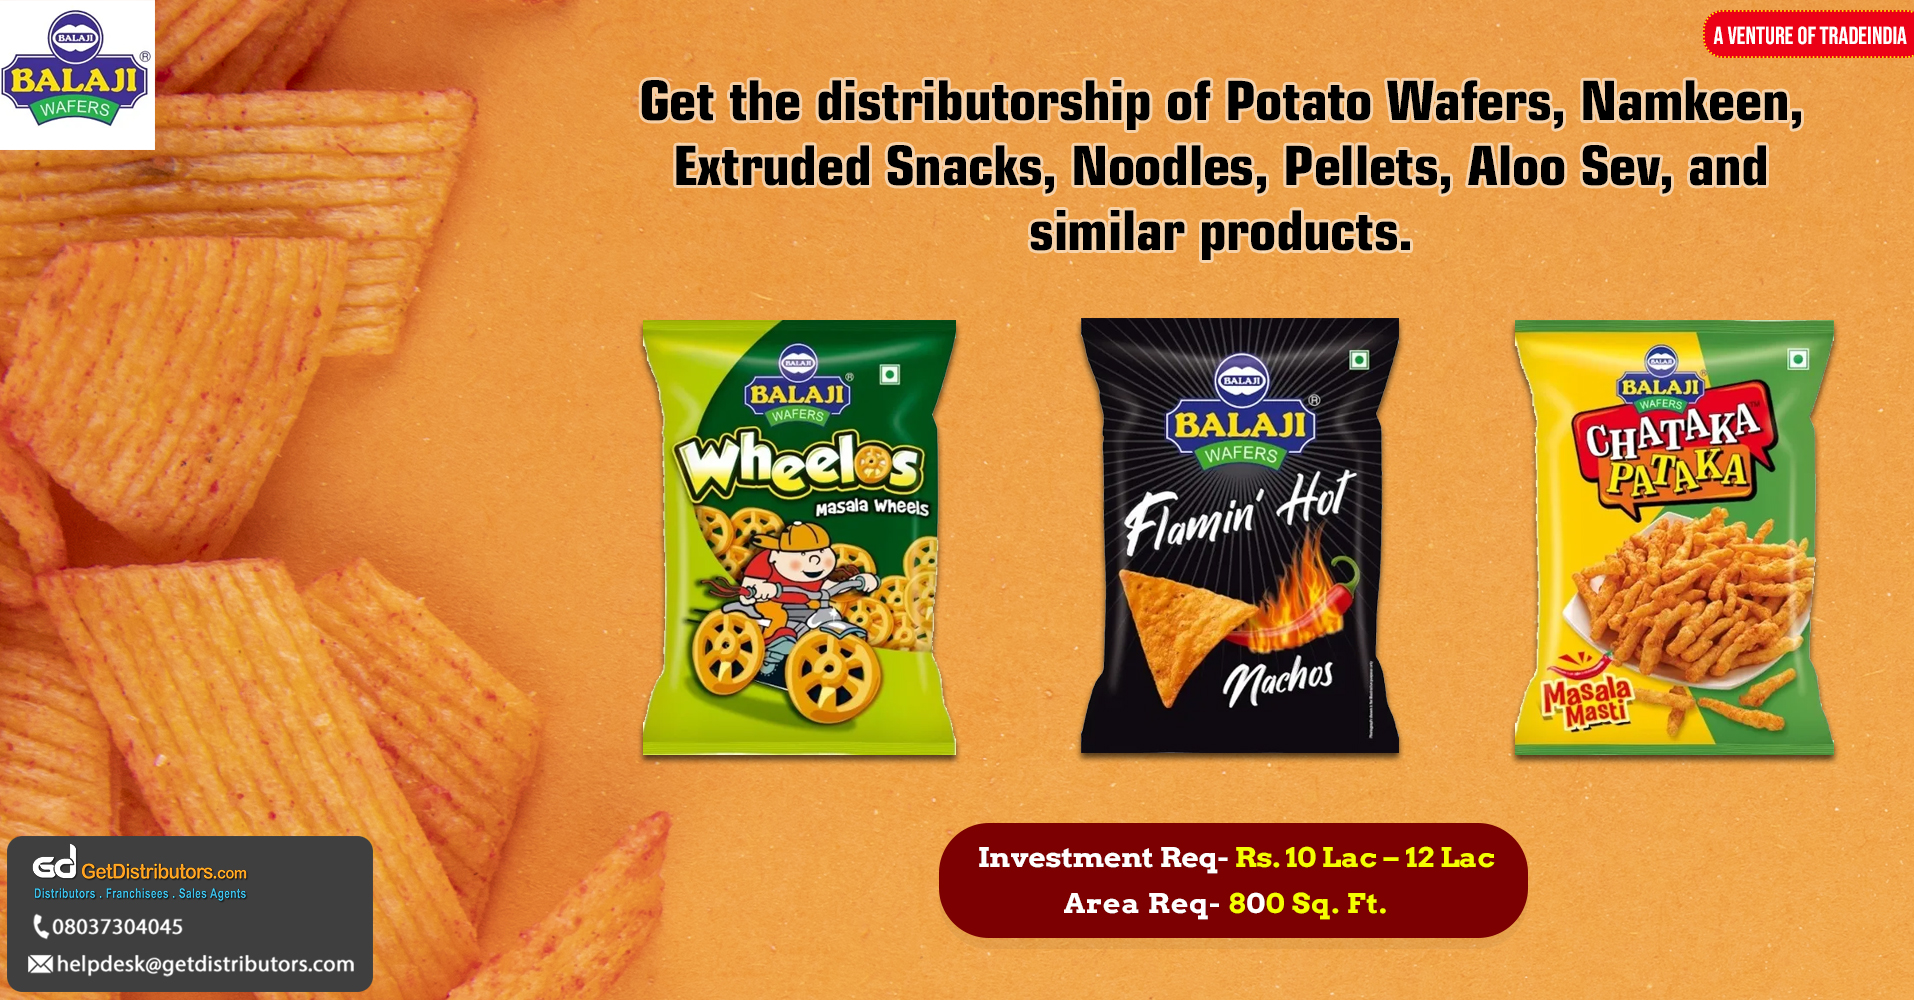 Delectable snacks and namkeen products for distribution